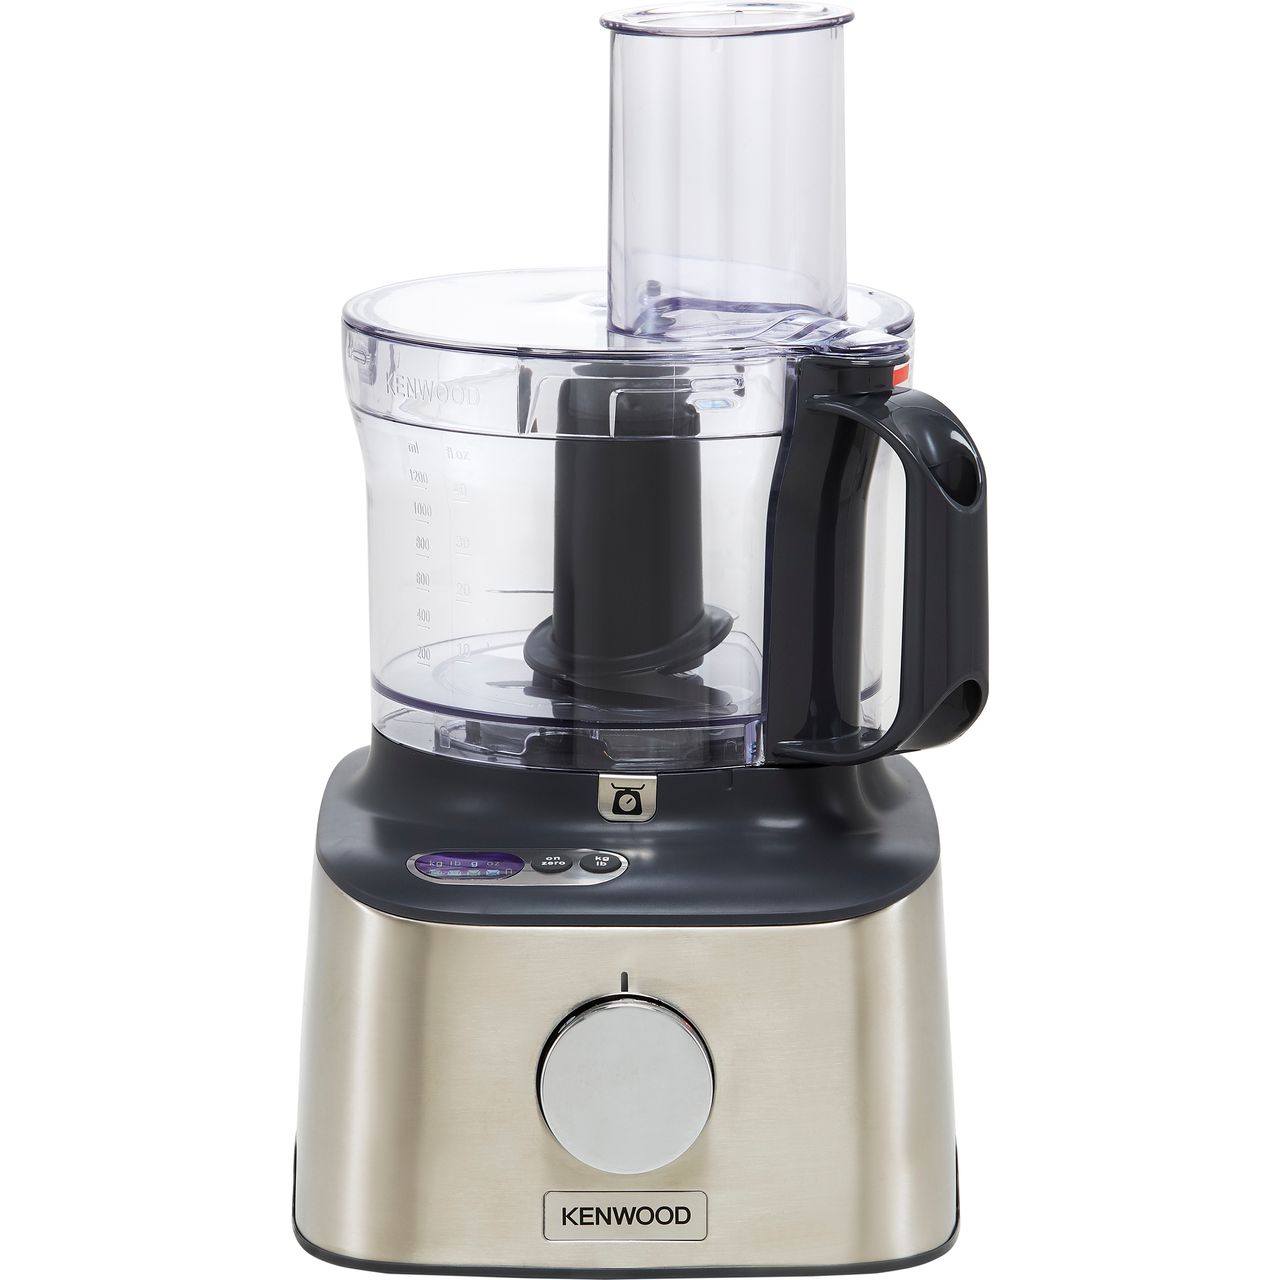 Kenwood KAH647PL Food Processor Attachment at The Good Guys